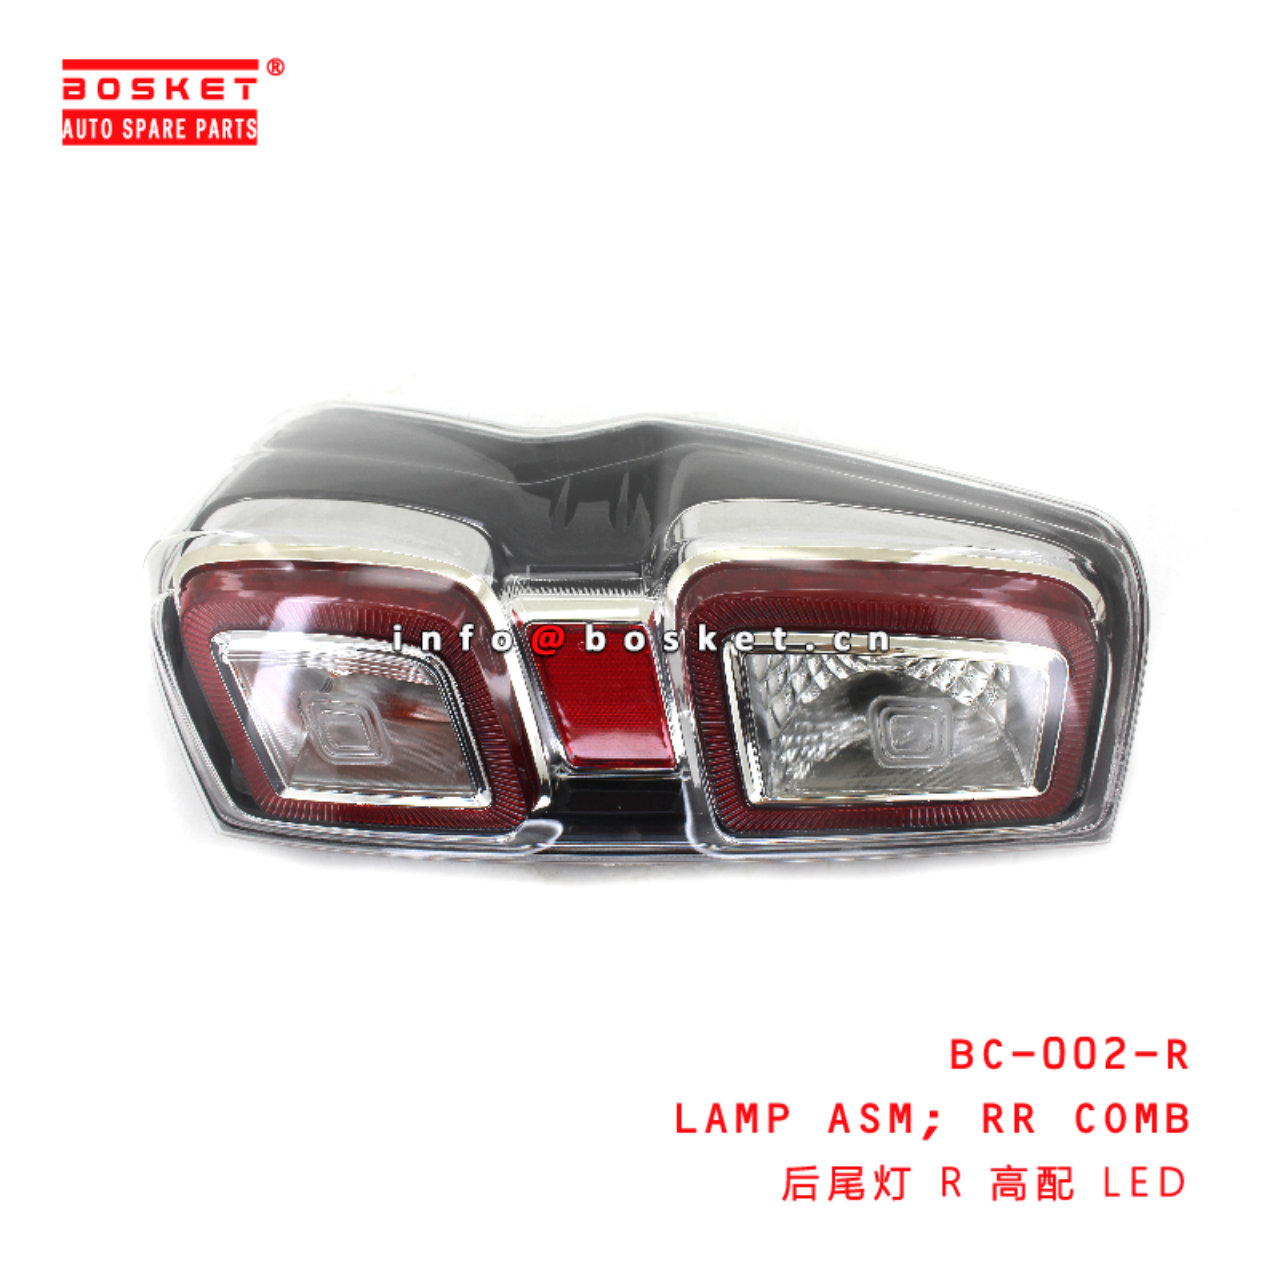 BC-002-R Rear Combination Lamp Assembly suitable for ISUZU DMAX2021  BC-002-R